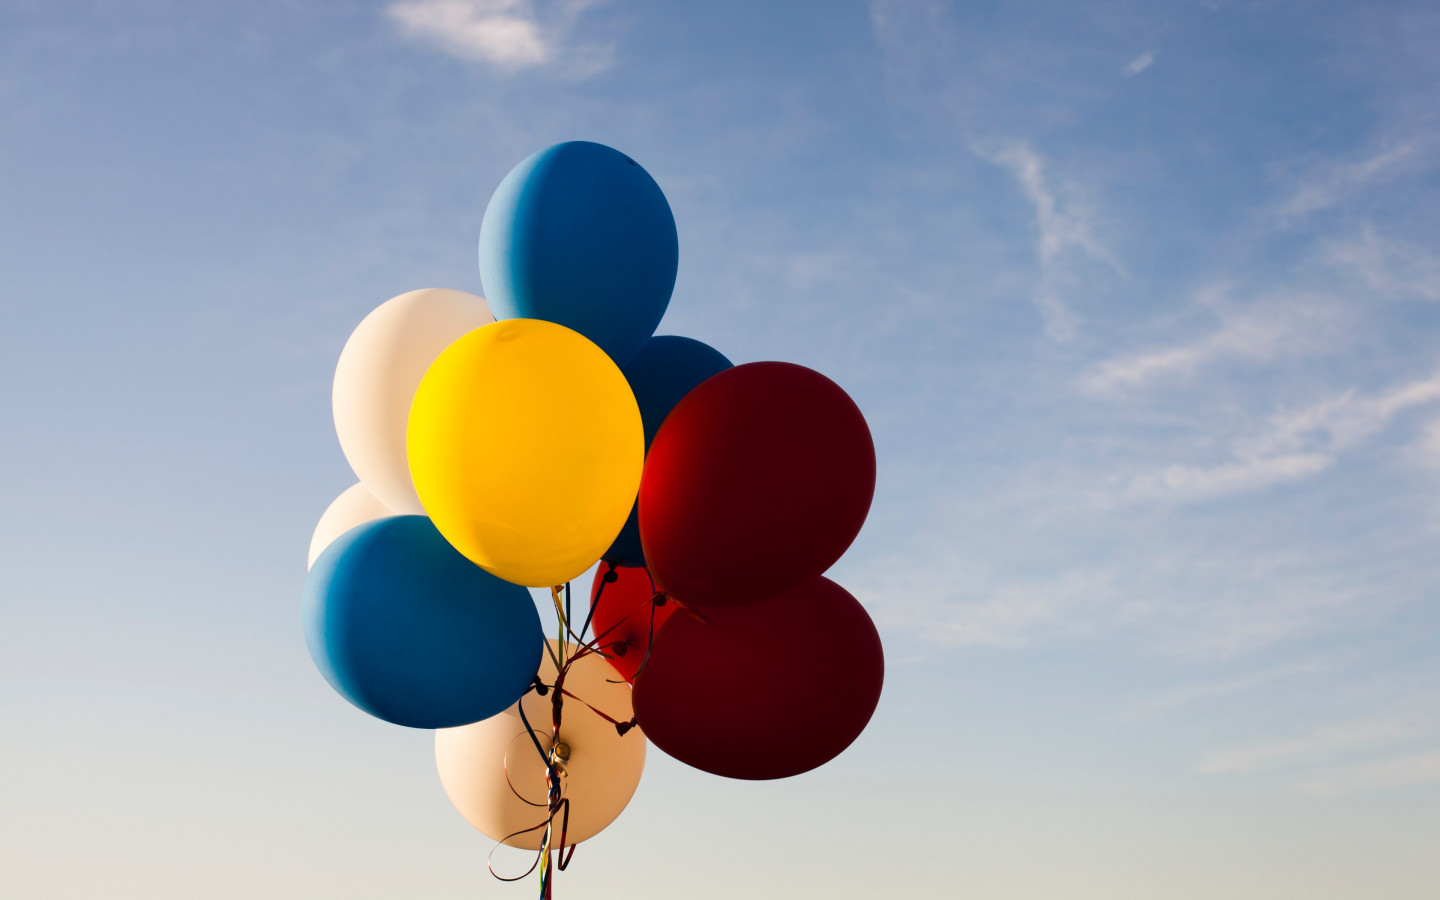 Colored balloons wallpaper 1440x900